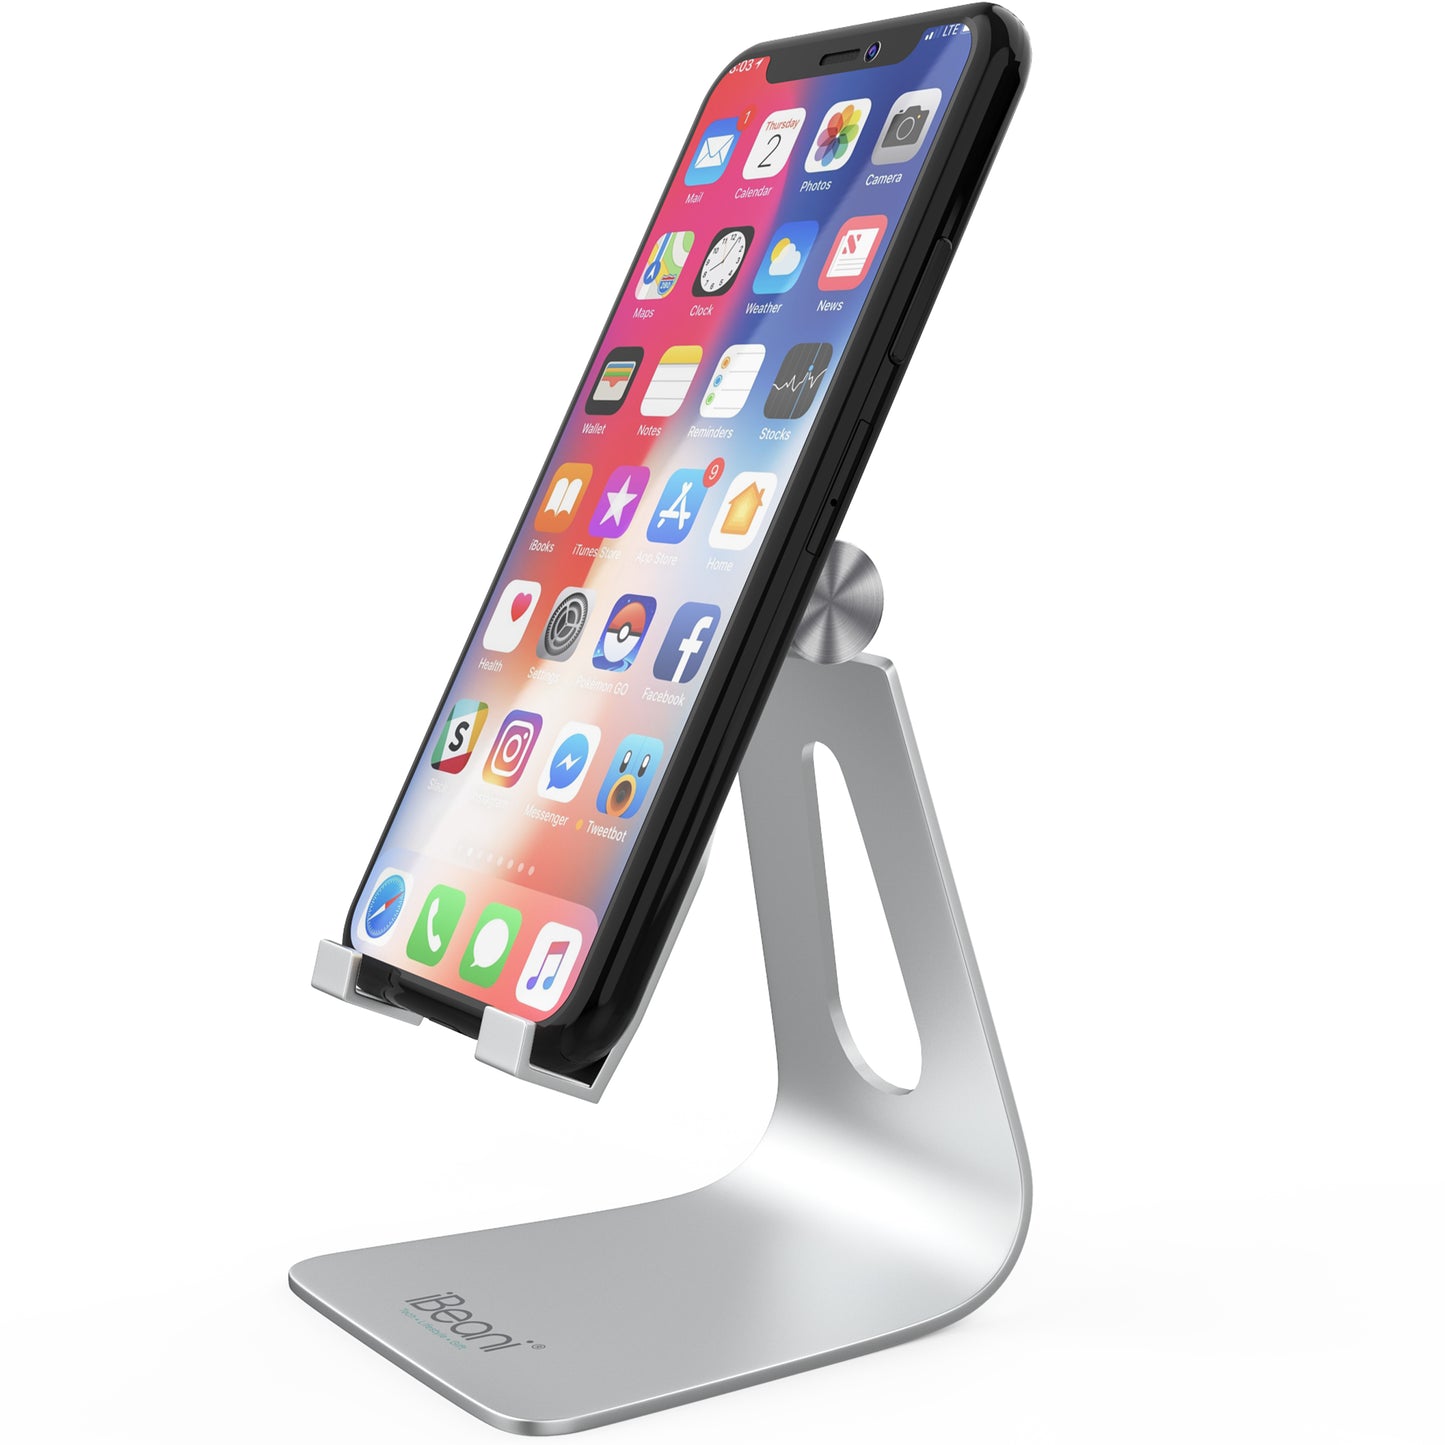 Adjustable Tripod Stand Phone Holder - Silver